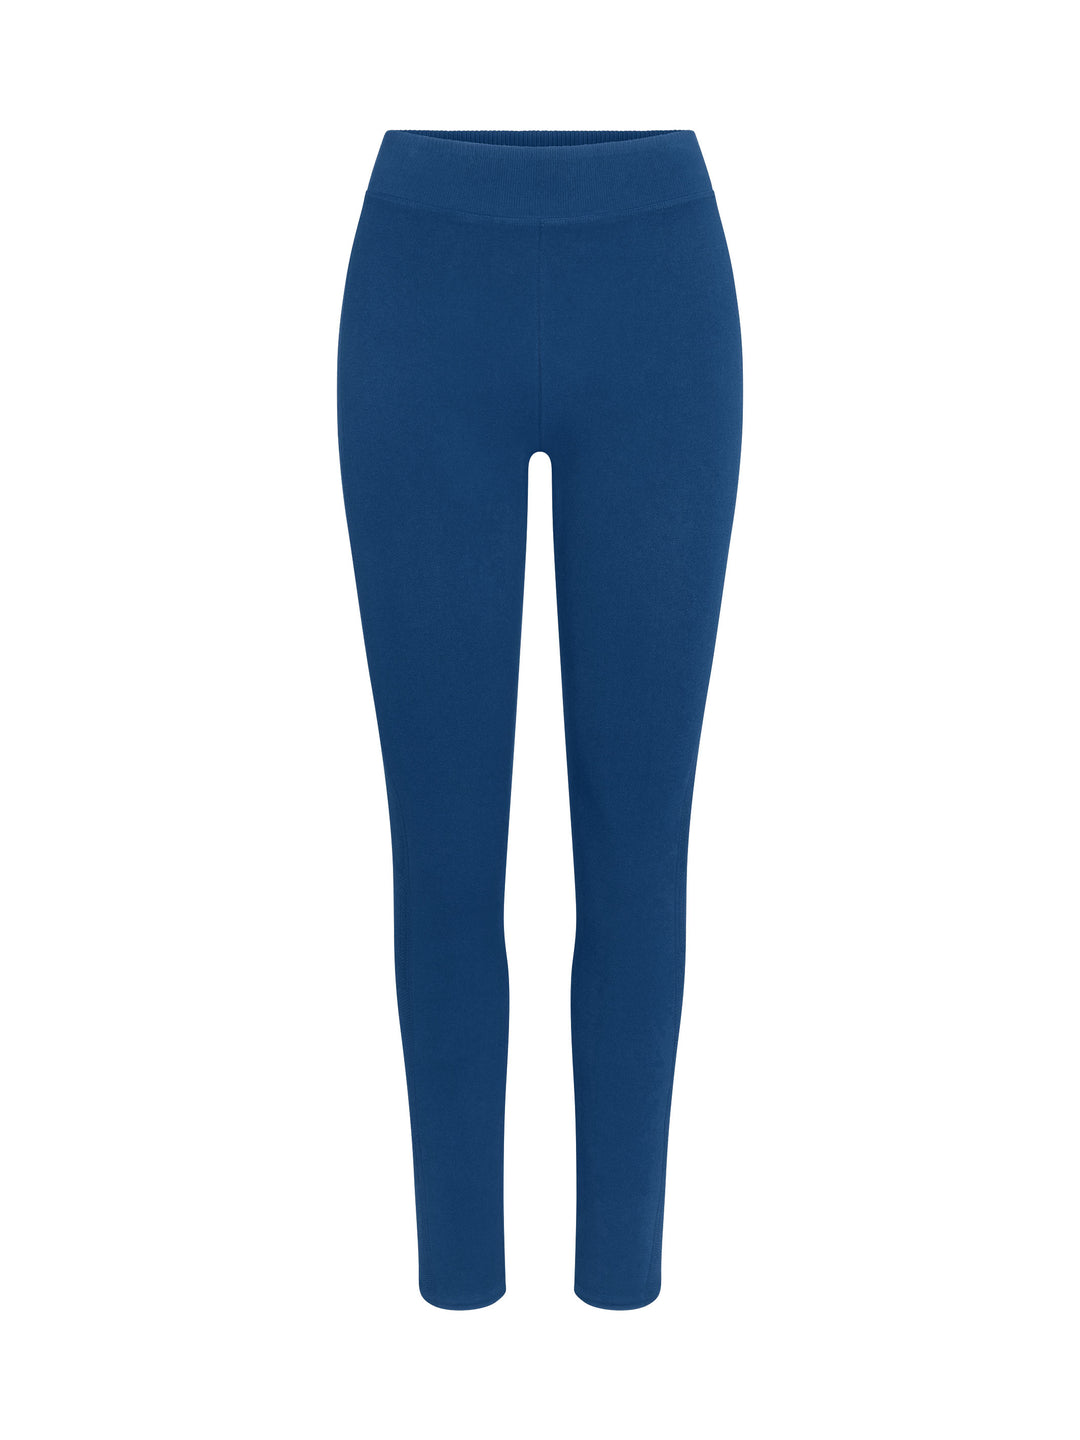 Women's 7/8 Seamless Compression Leggings front view in Astral Blue